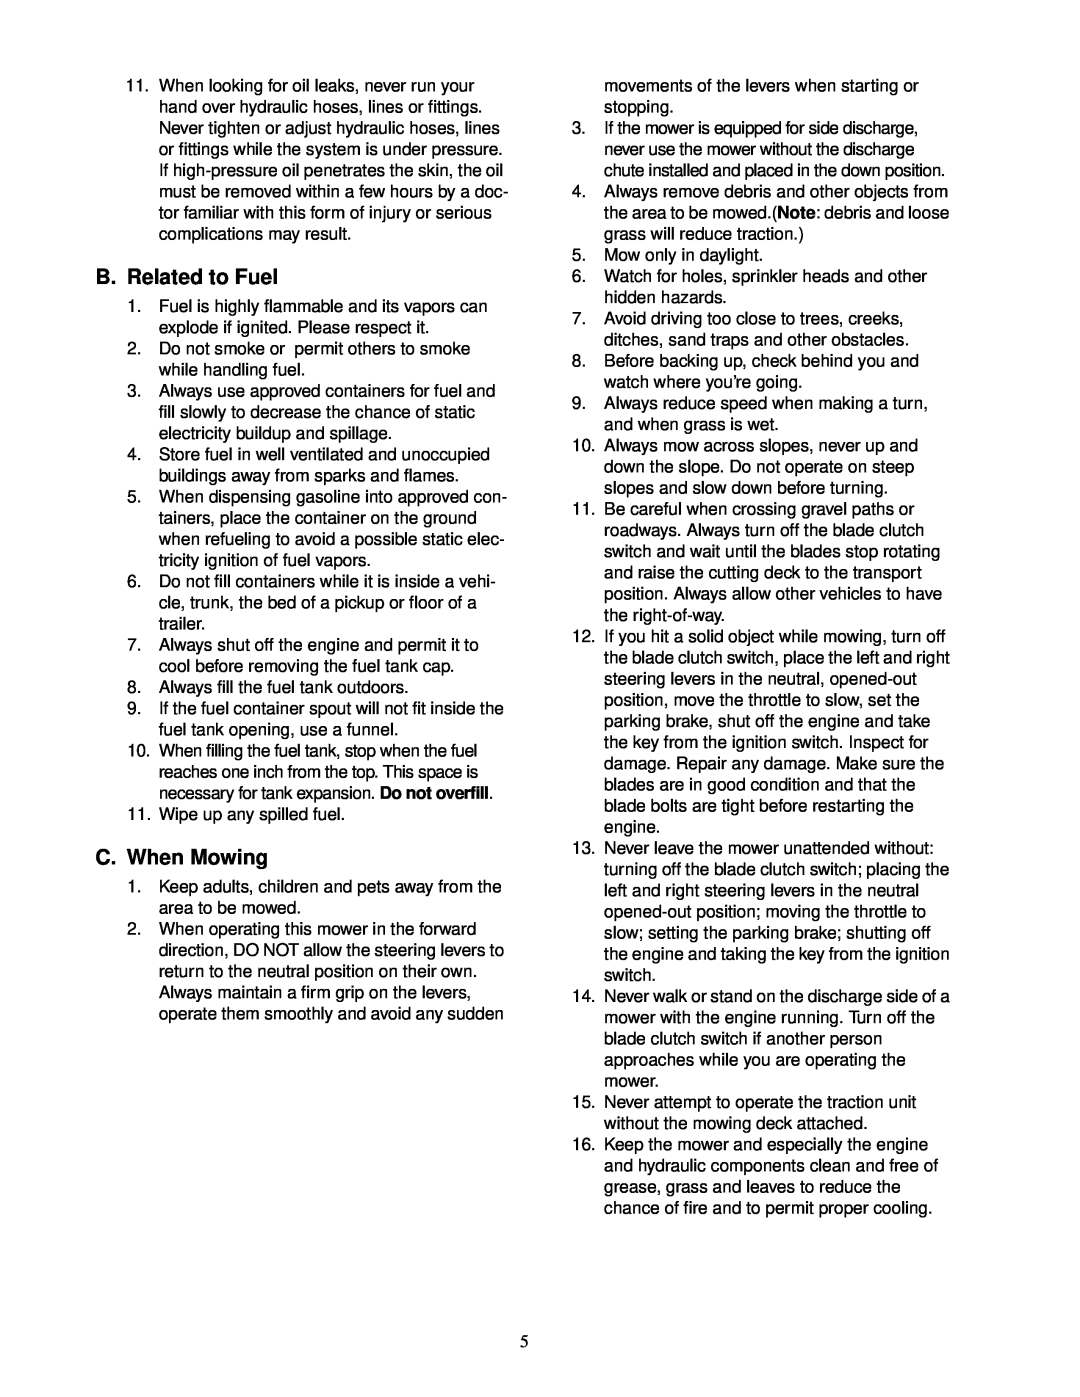 Cub Cadet service manual B. Related to Fuel, C. When Mowing 